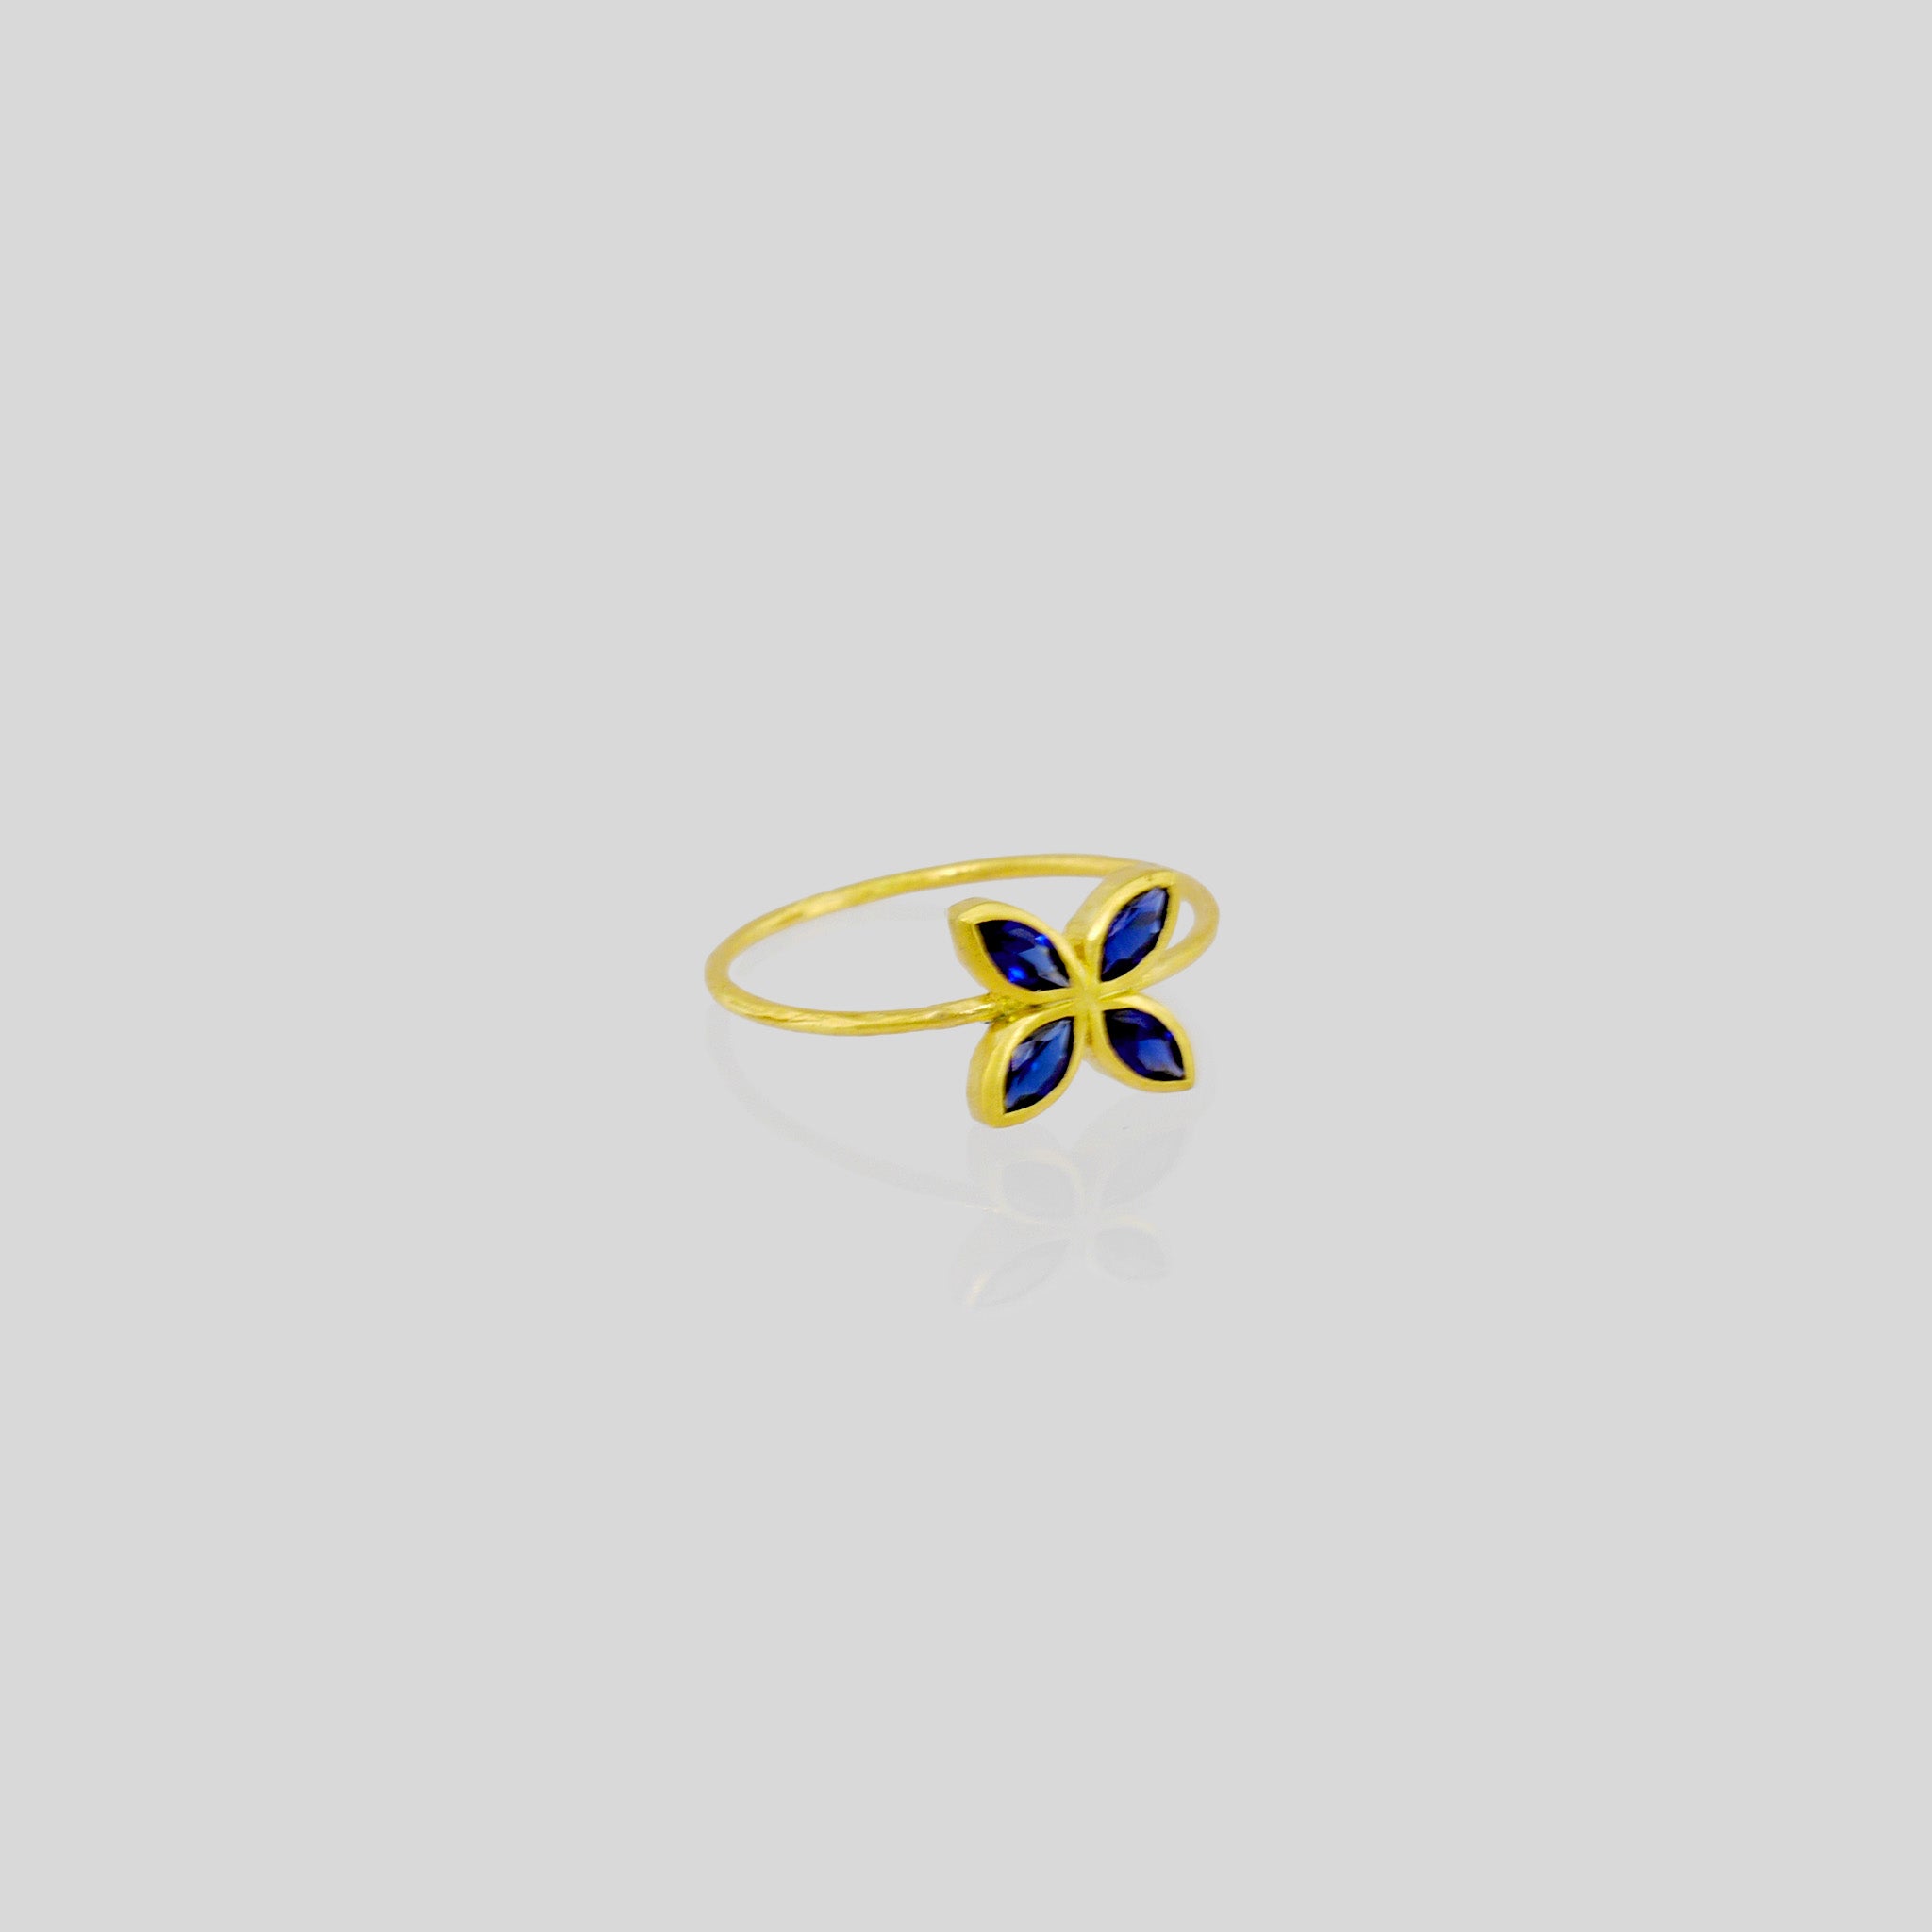 Delicate Gold ring with Sapphire marquee in a flower-shaped design. Radiant and cheerful addition to any collection.